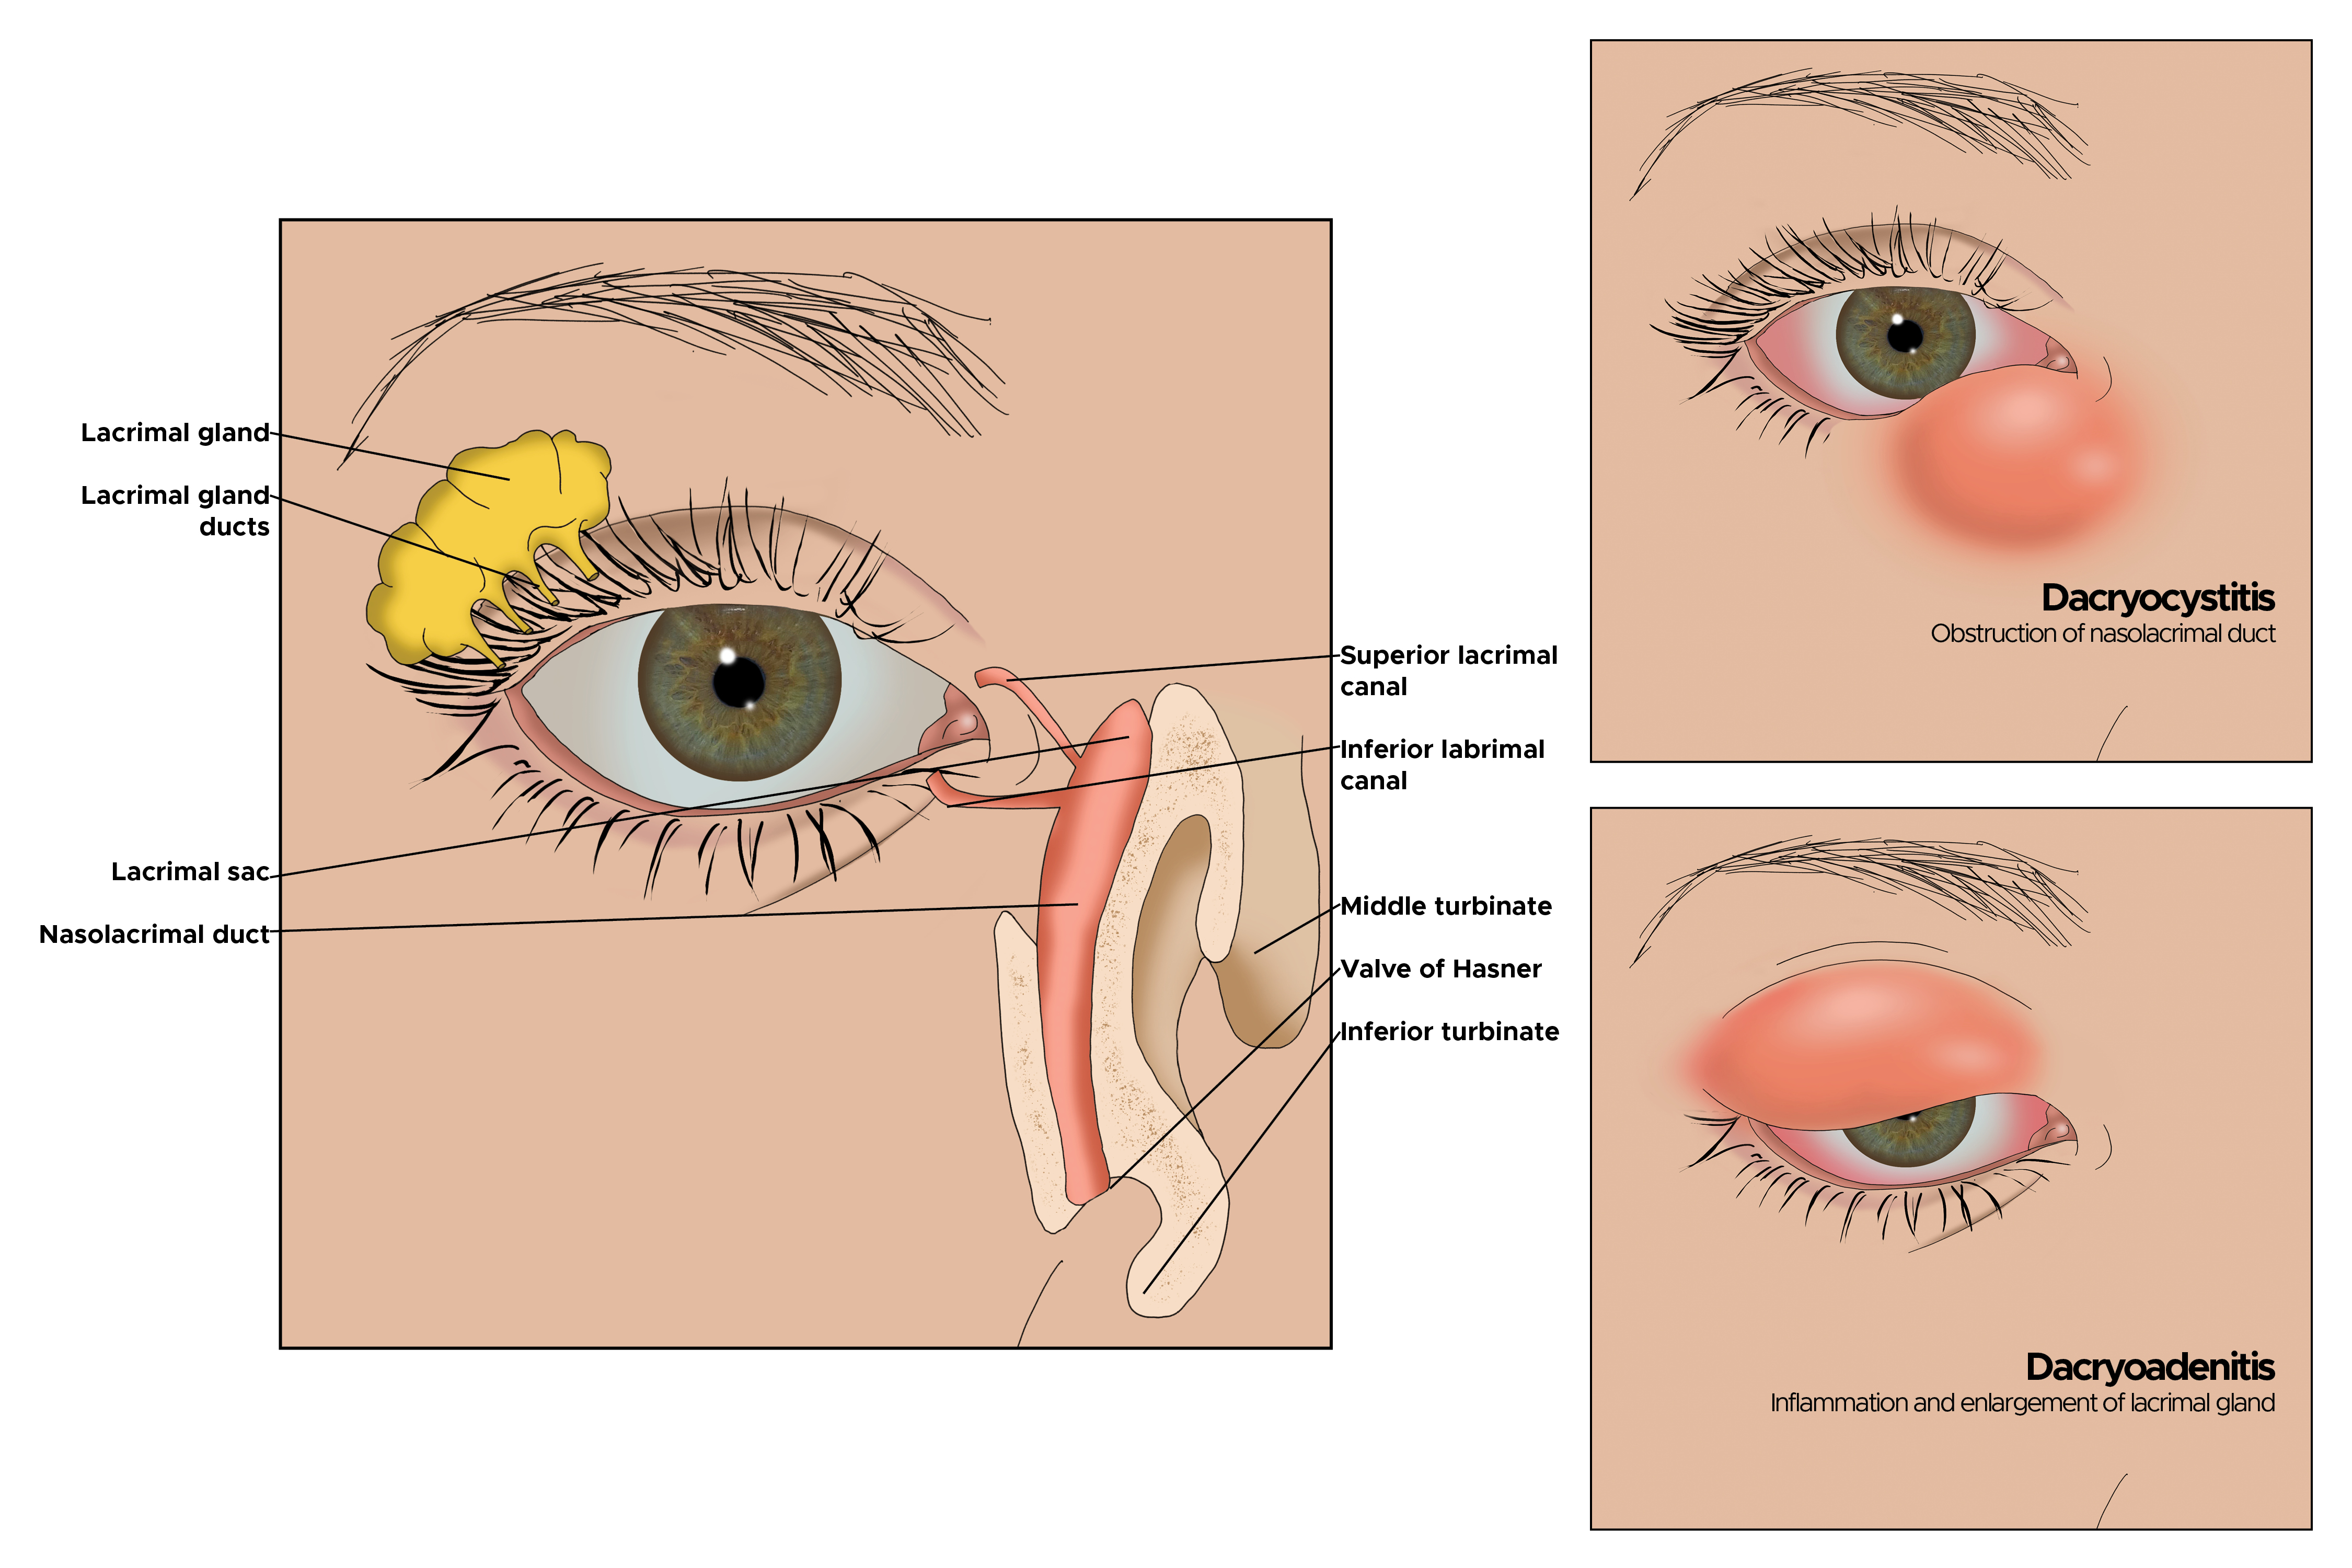 Illustration of eye. Lacrimal gland and ducts, lacrimal sac, nasolacrimal duct. Lacrimal canal (superior, inferior), middle turbinate, valve of Hasner, Inferior turbinate. Dacryocystitis and Dacryoadenitis.